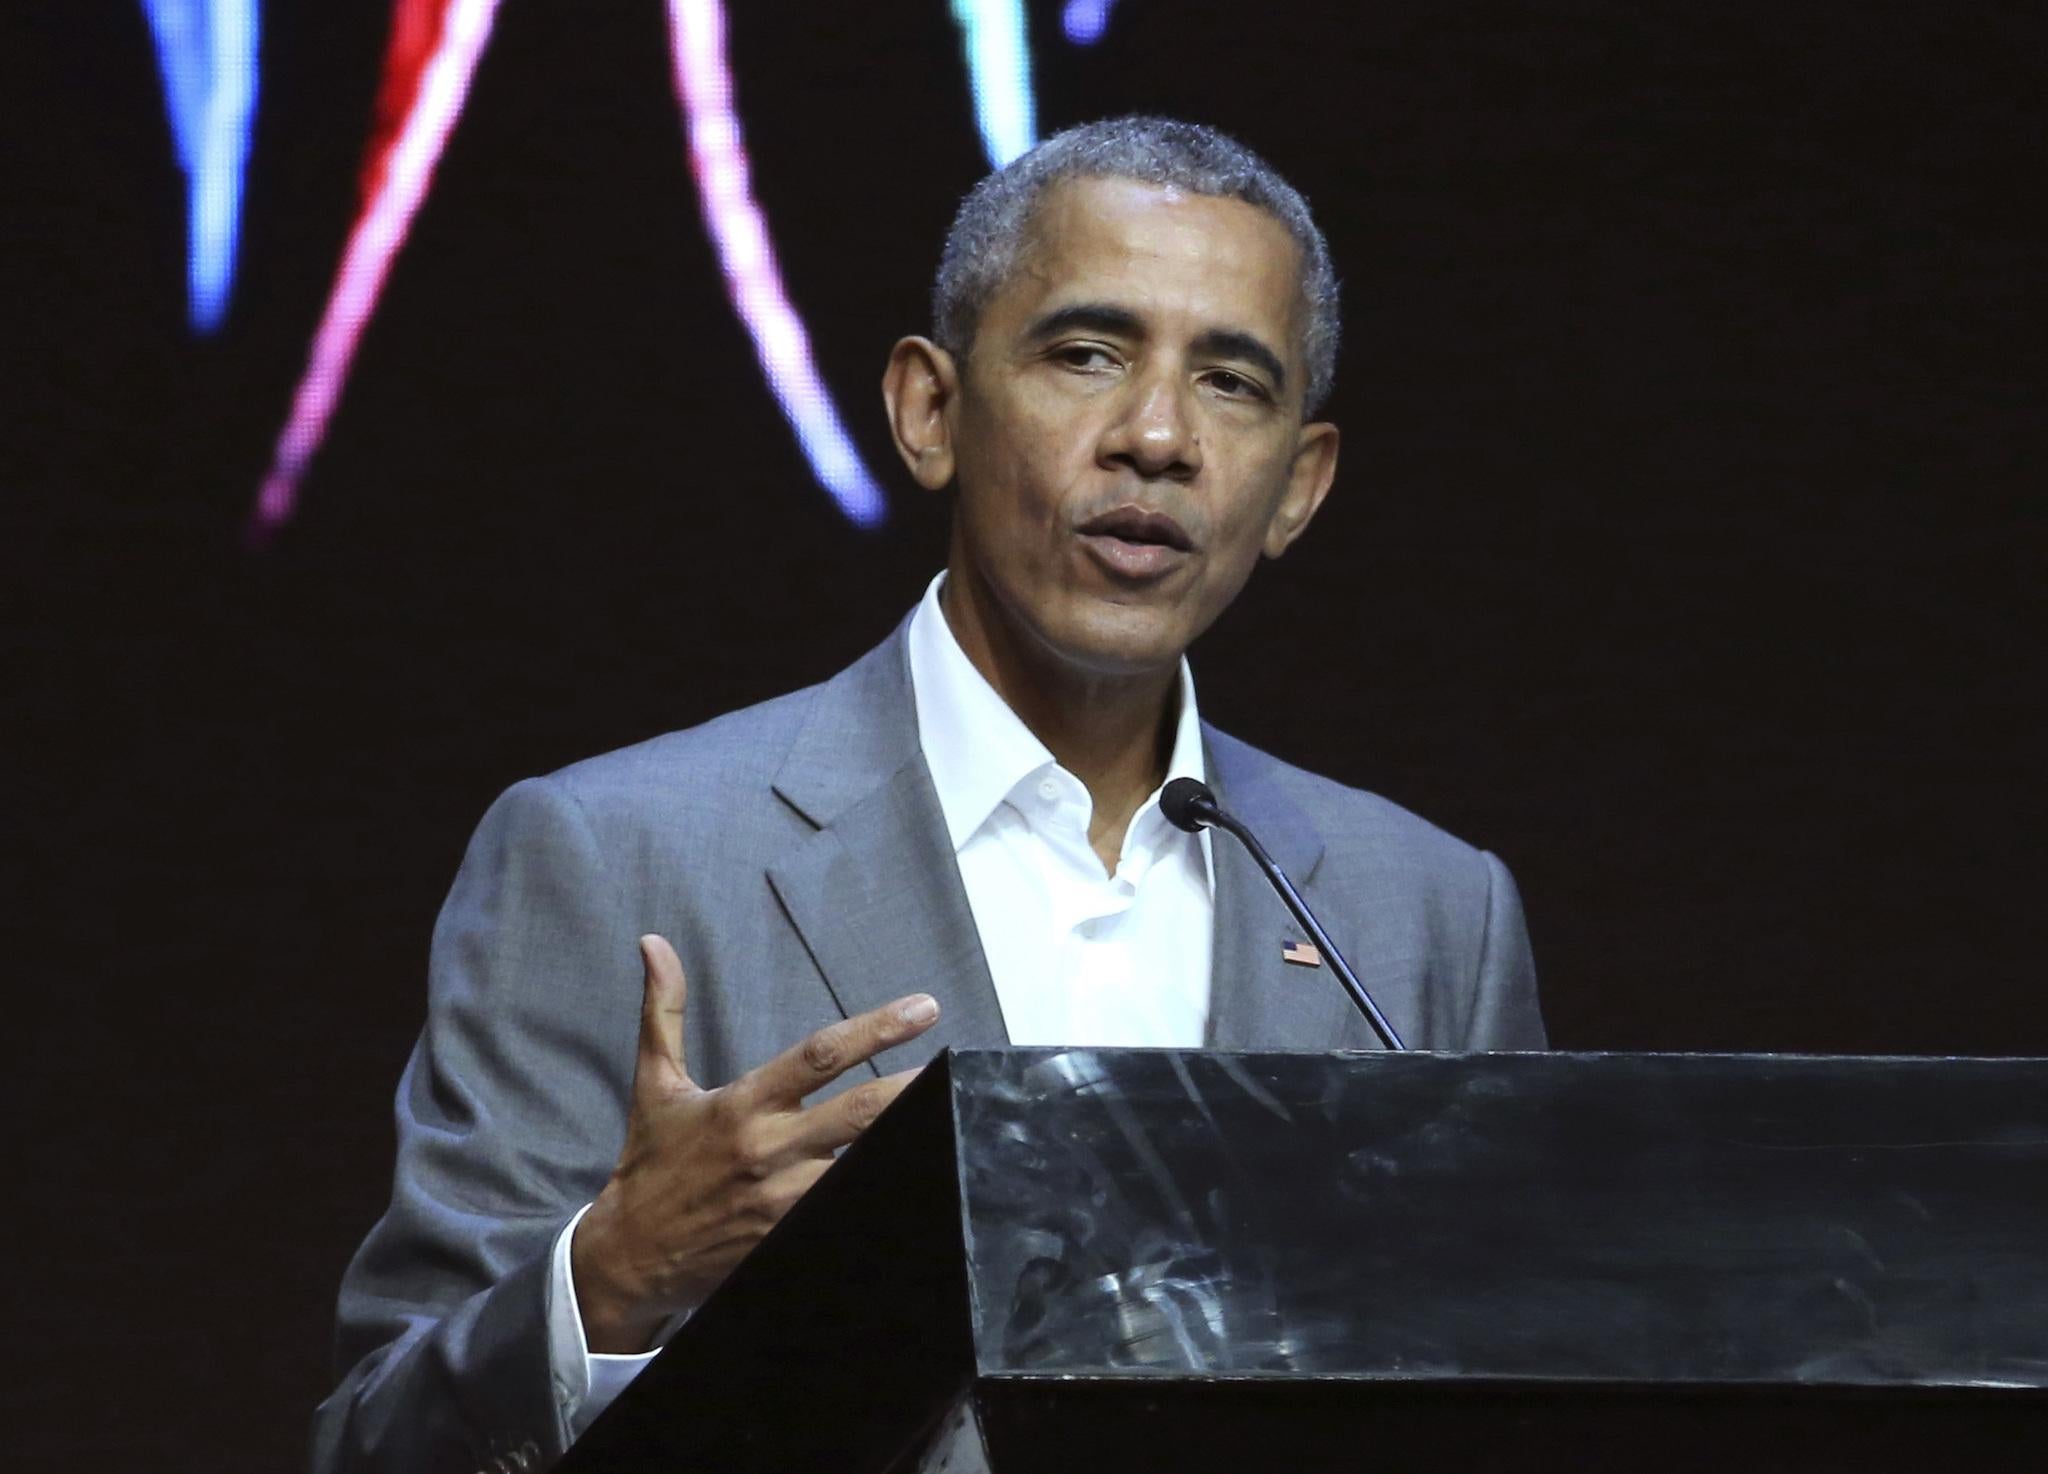 Former US President Barack Obama delivers his speech during the 4th Congress of Indonesian Diaspora Network in Jakarta, Indonesia, on July 1, 2017